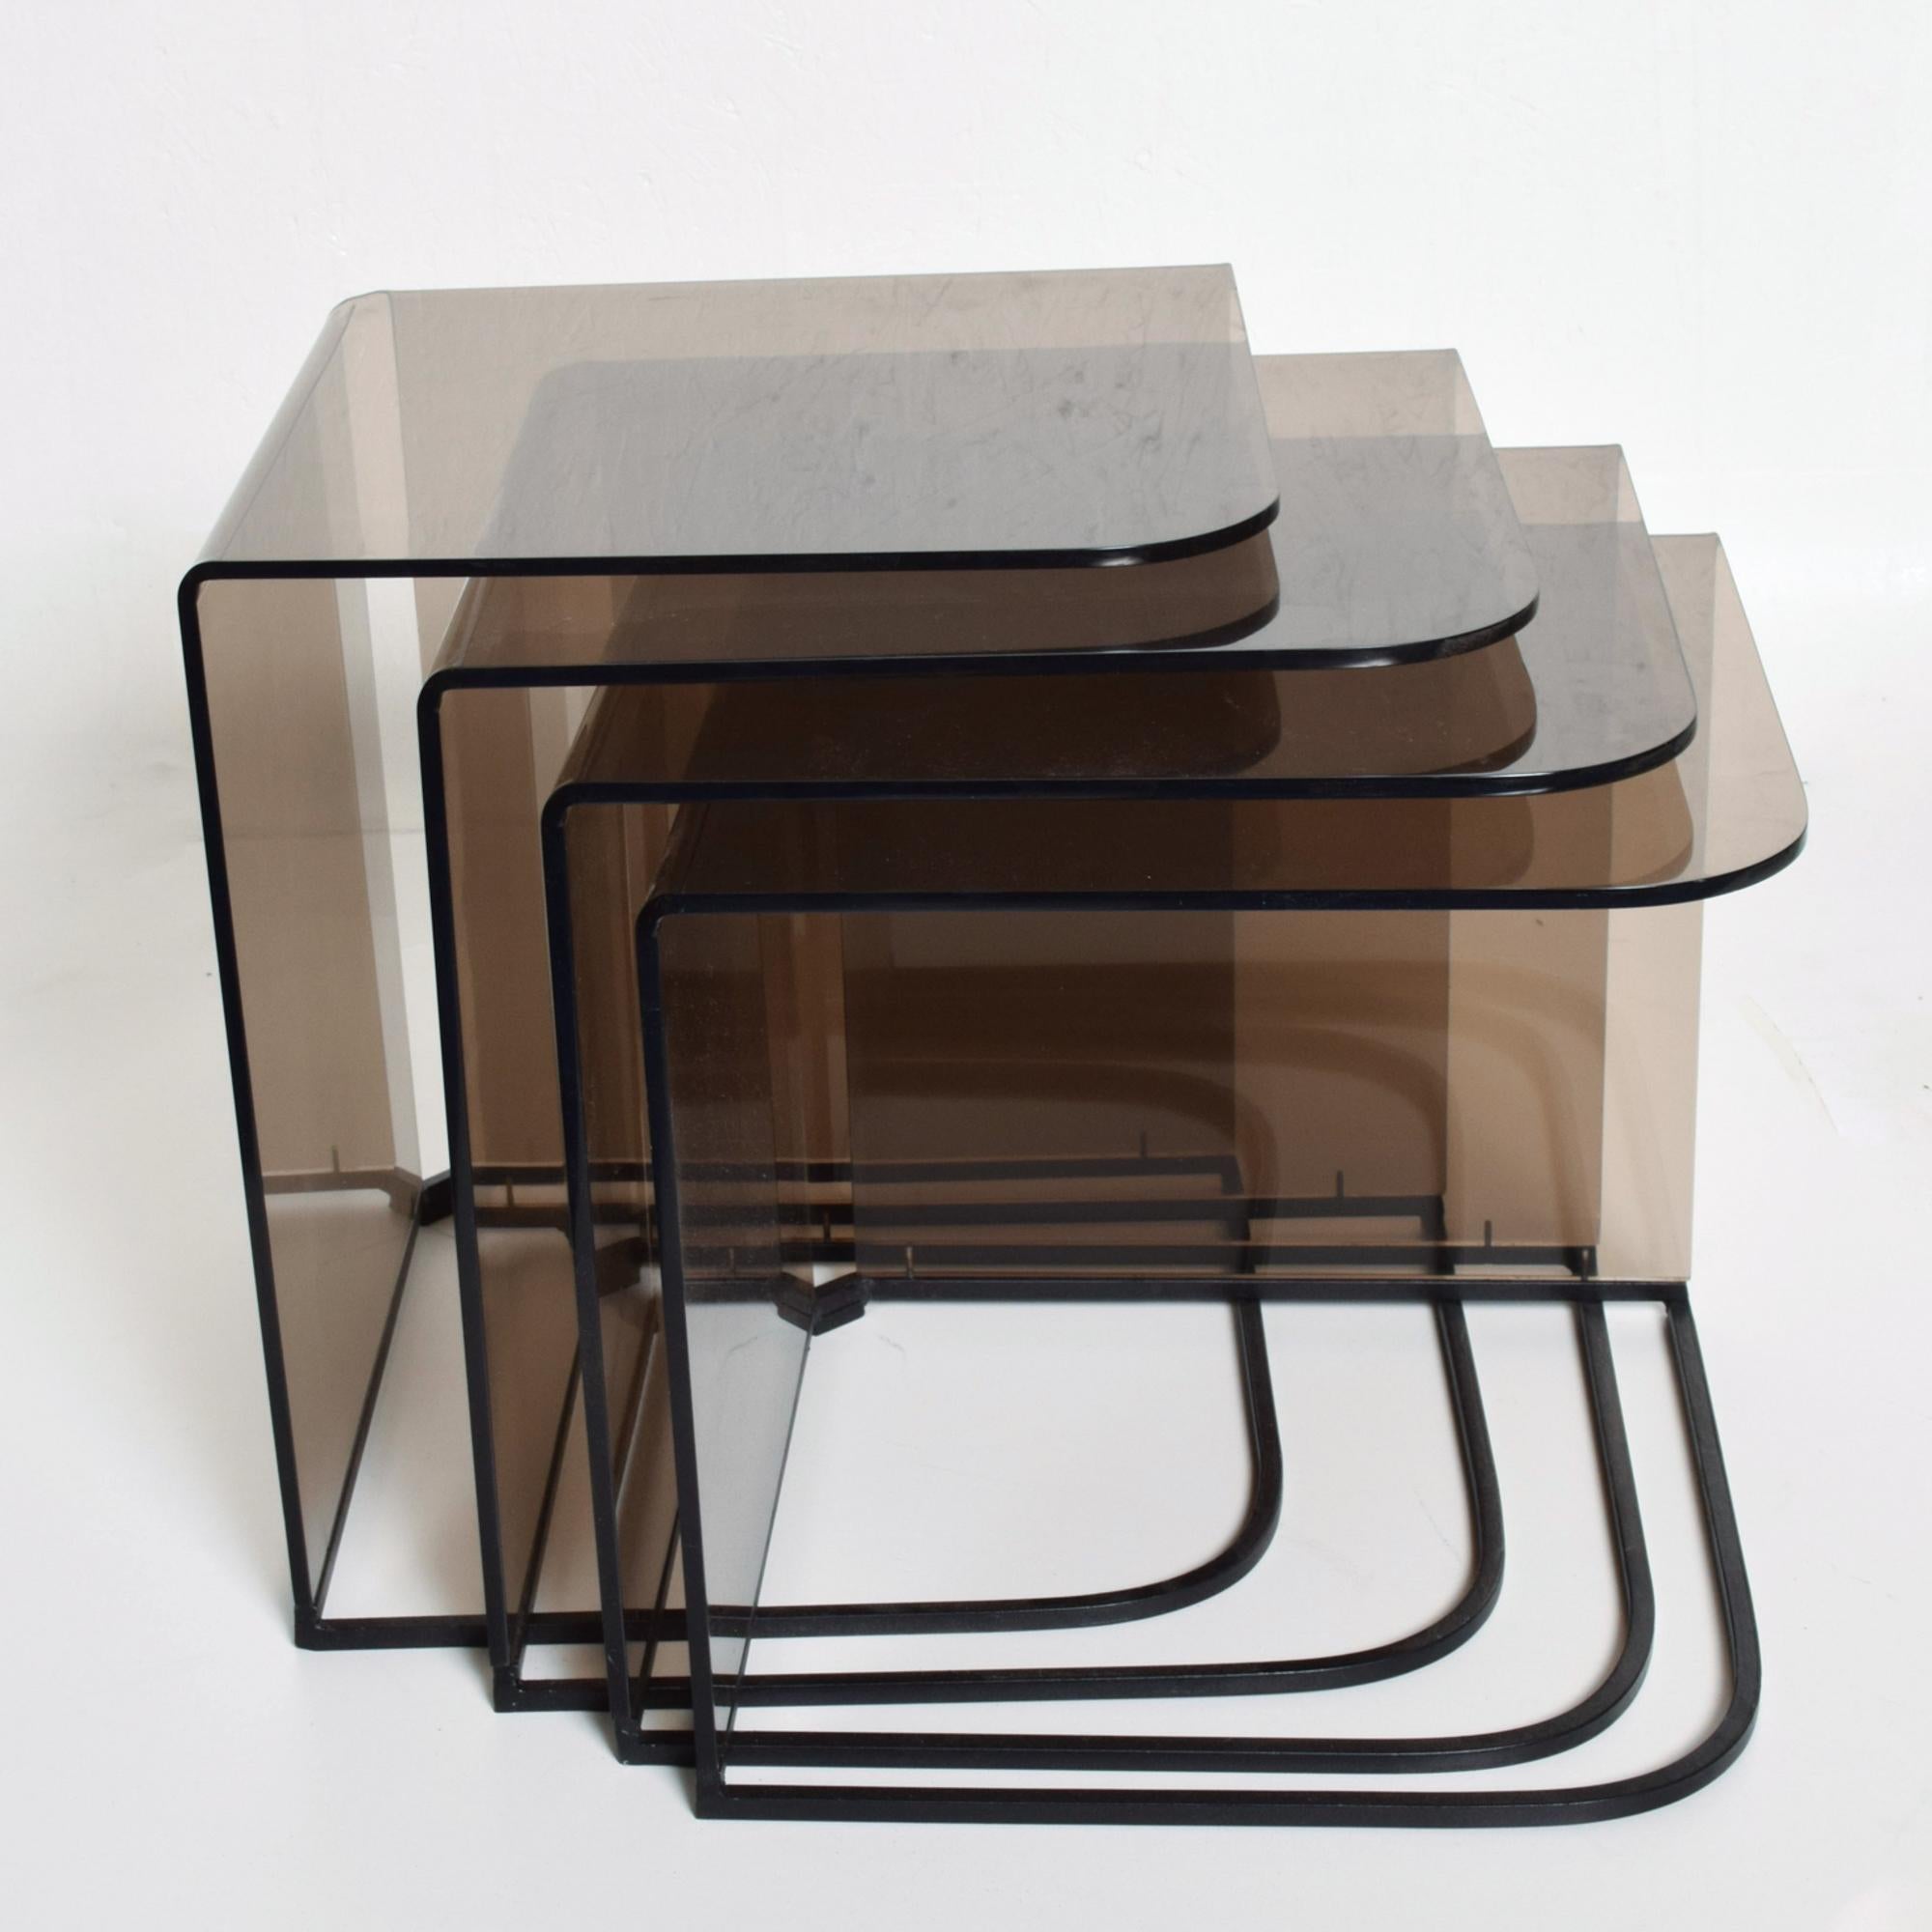 1970s Set of four (4) Nesting Tables Satin Black Metal Iron frame with Smokey Gray Lucite Plexiglass.
Made in the USA circa the 1970s. No maker information present.
Attributed to Charles Hollis Jones.
Largest 18 H x 15.75 x 15.75  #2 16.75 H #3